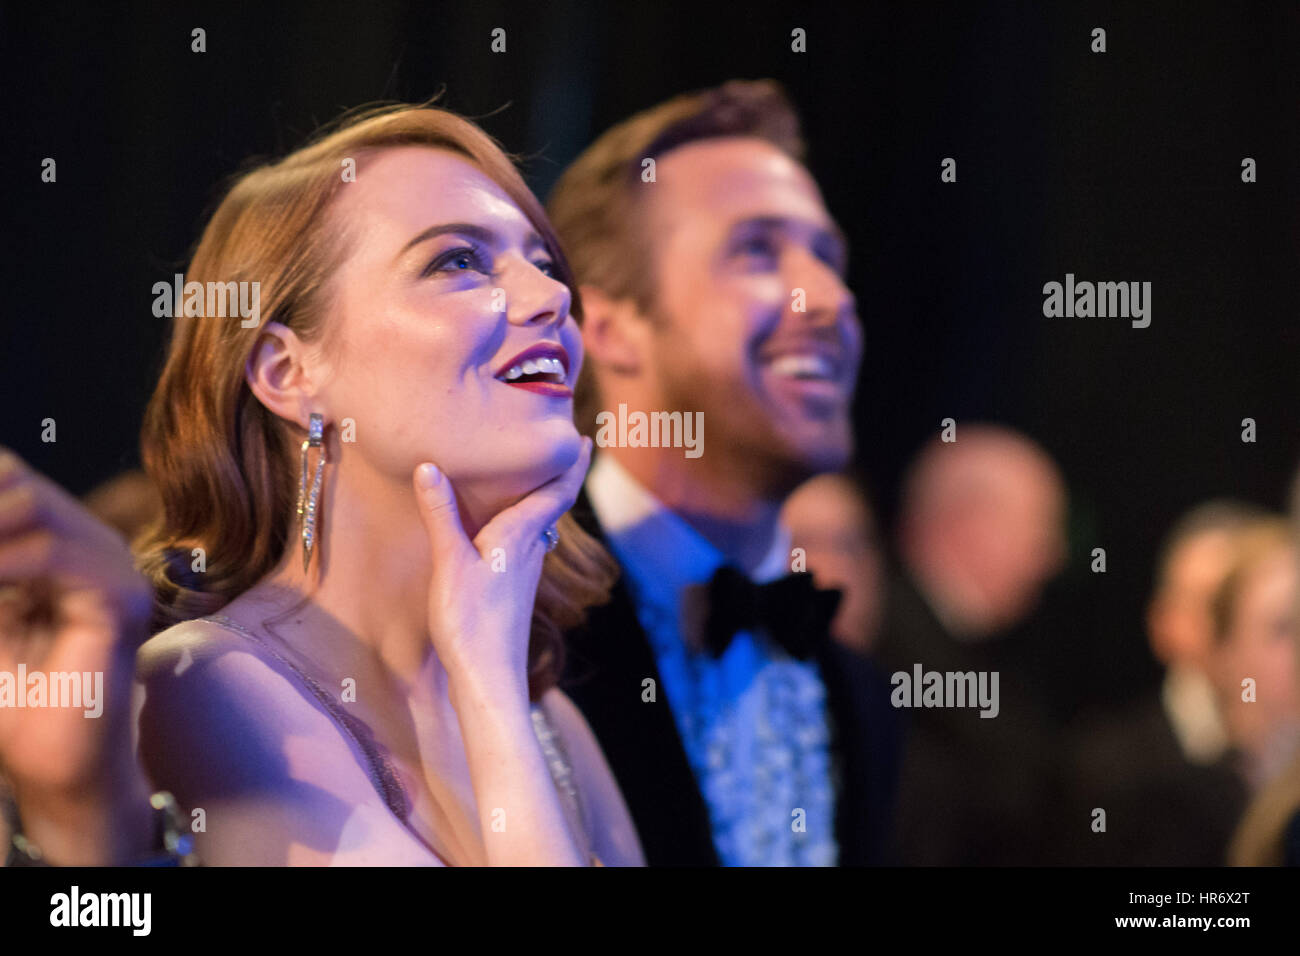 Hollywood, California, USA. 26th Feb, 2017. EMMA STONE and RYAN GOSLING in the audience during the 89th Annual Academy Awards. Credit: Ampas/AdMedia/ZUMA Wire/Alamy Live News Stock Photo